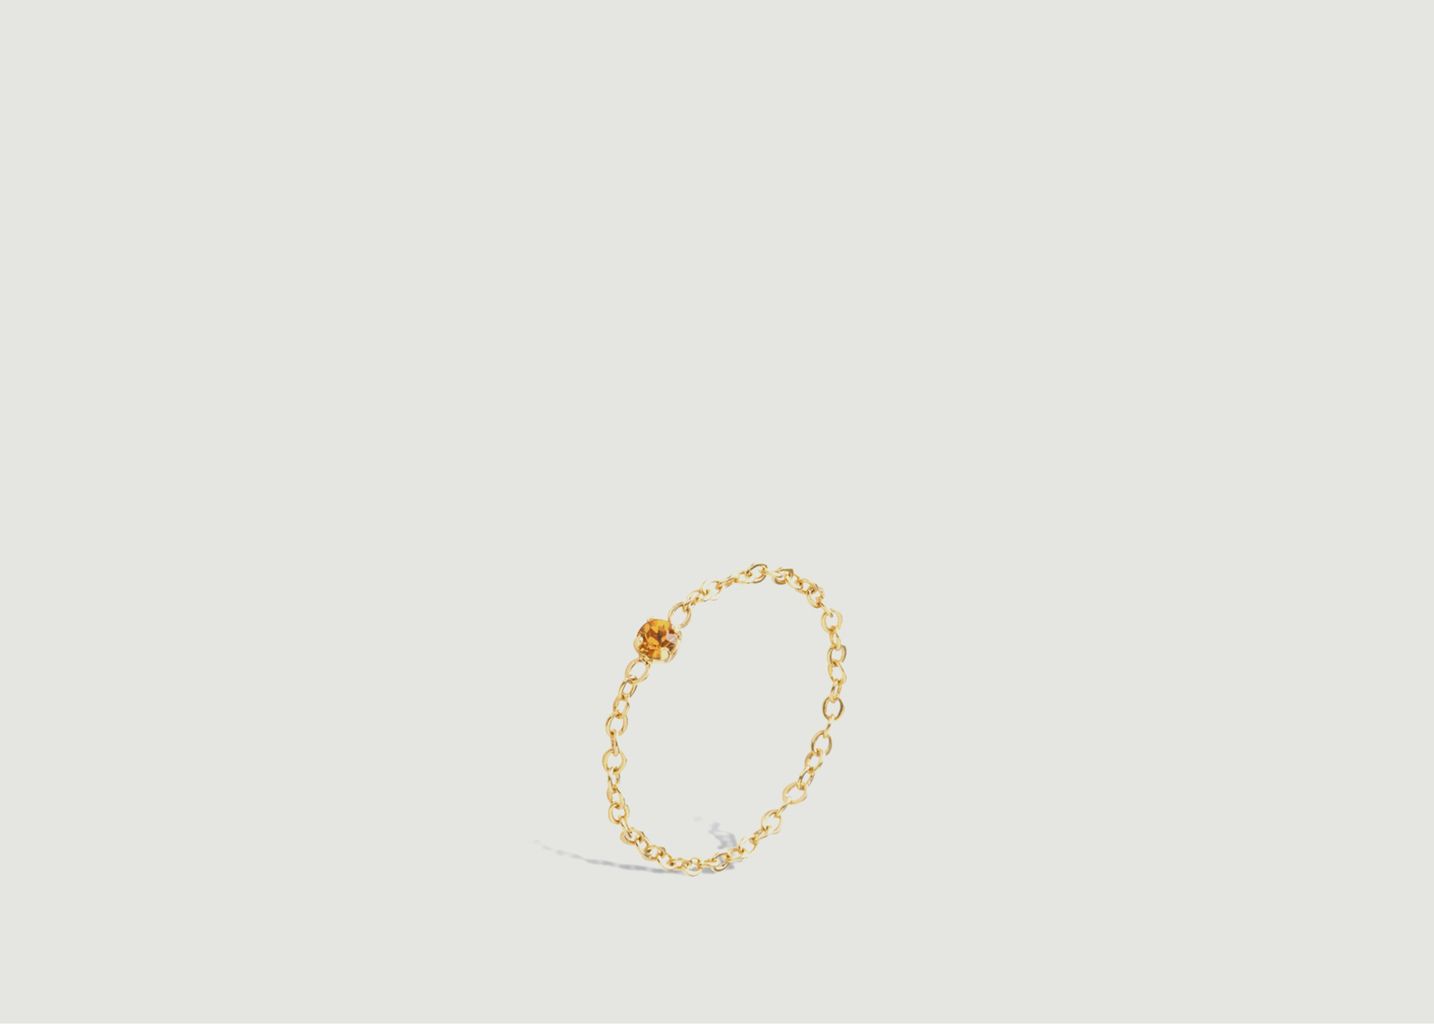 Alban Chain Ring - April Please